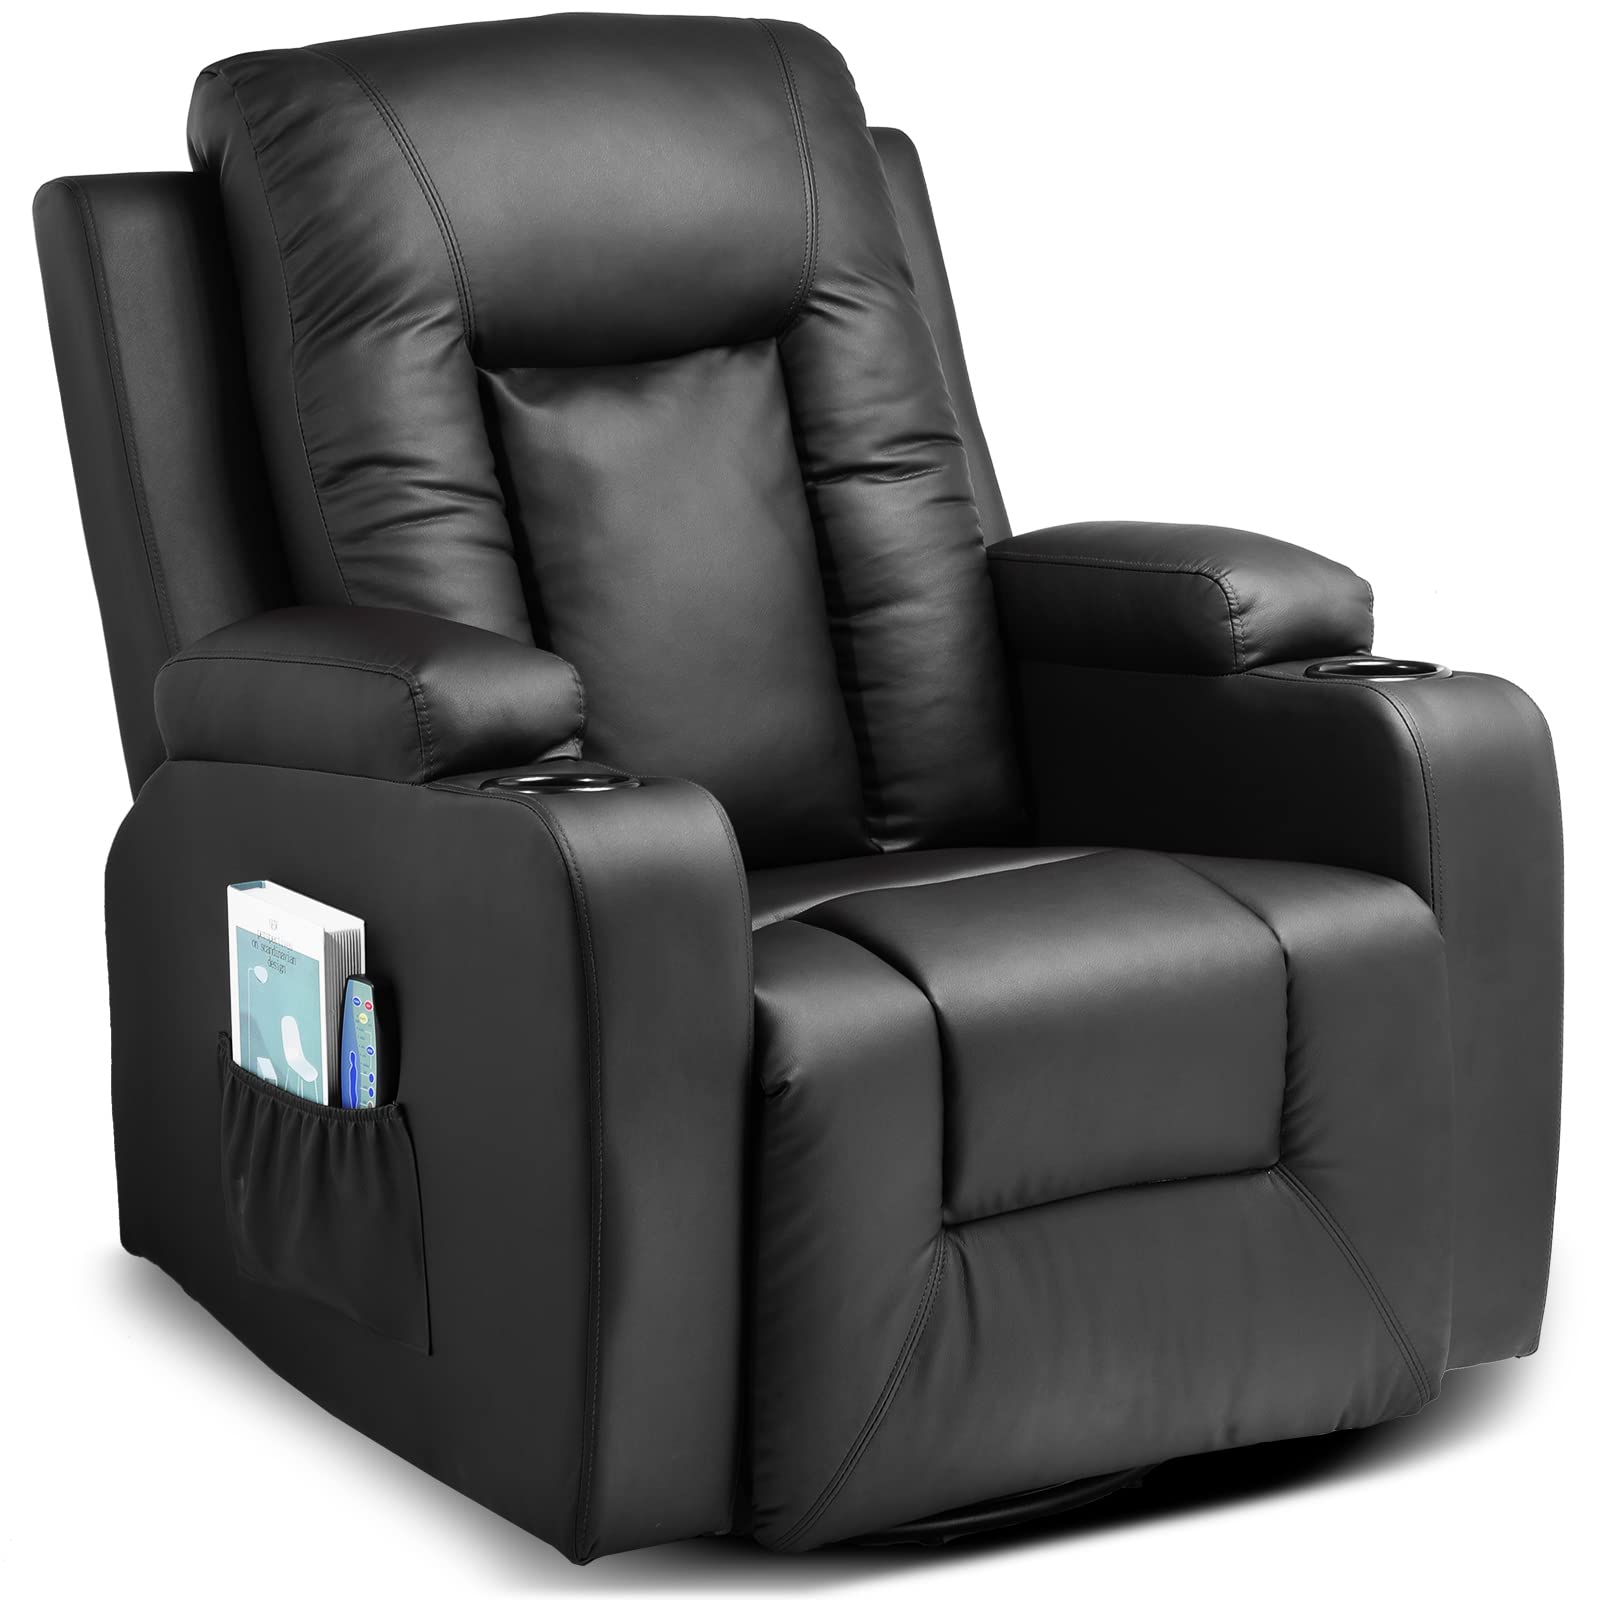 cOMHOMA Leather Recliner chair Modern Rocker with Heated Massage Ergonomic Lounge 360 Degree Swivel Single Sofa Seat with Drink 